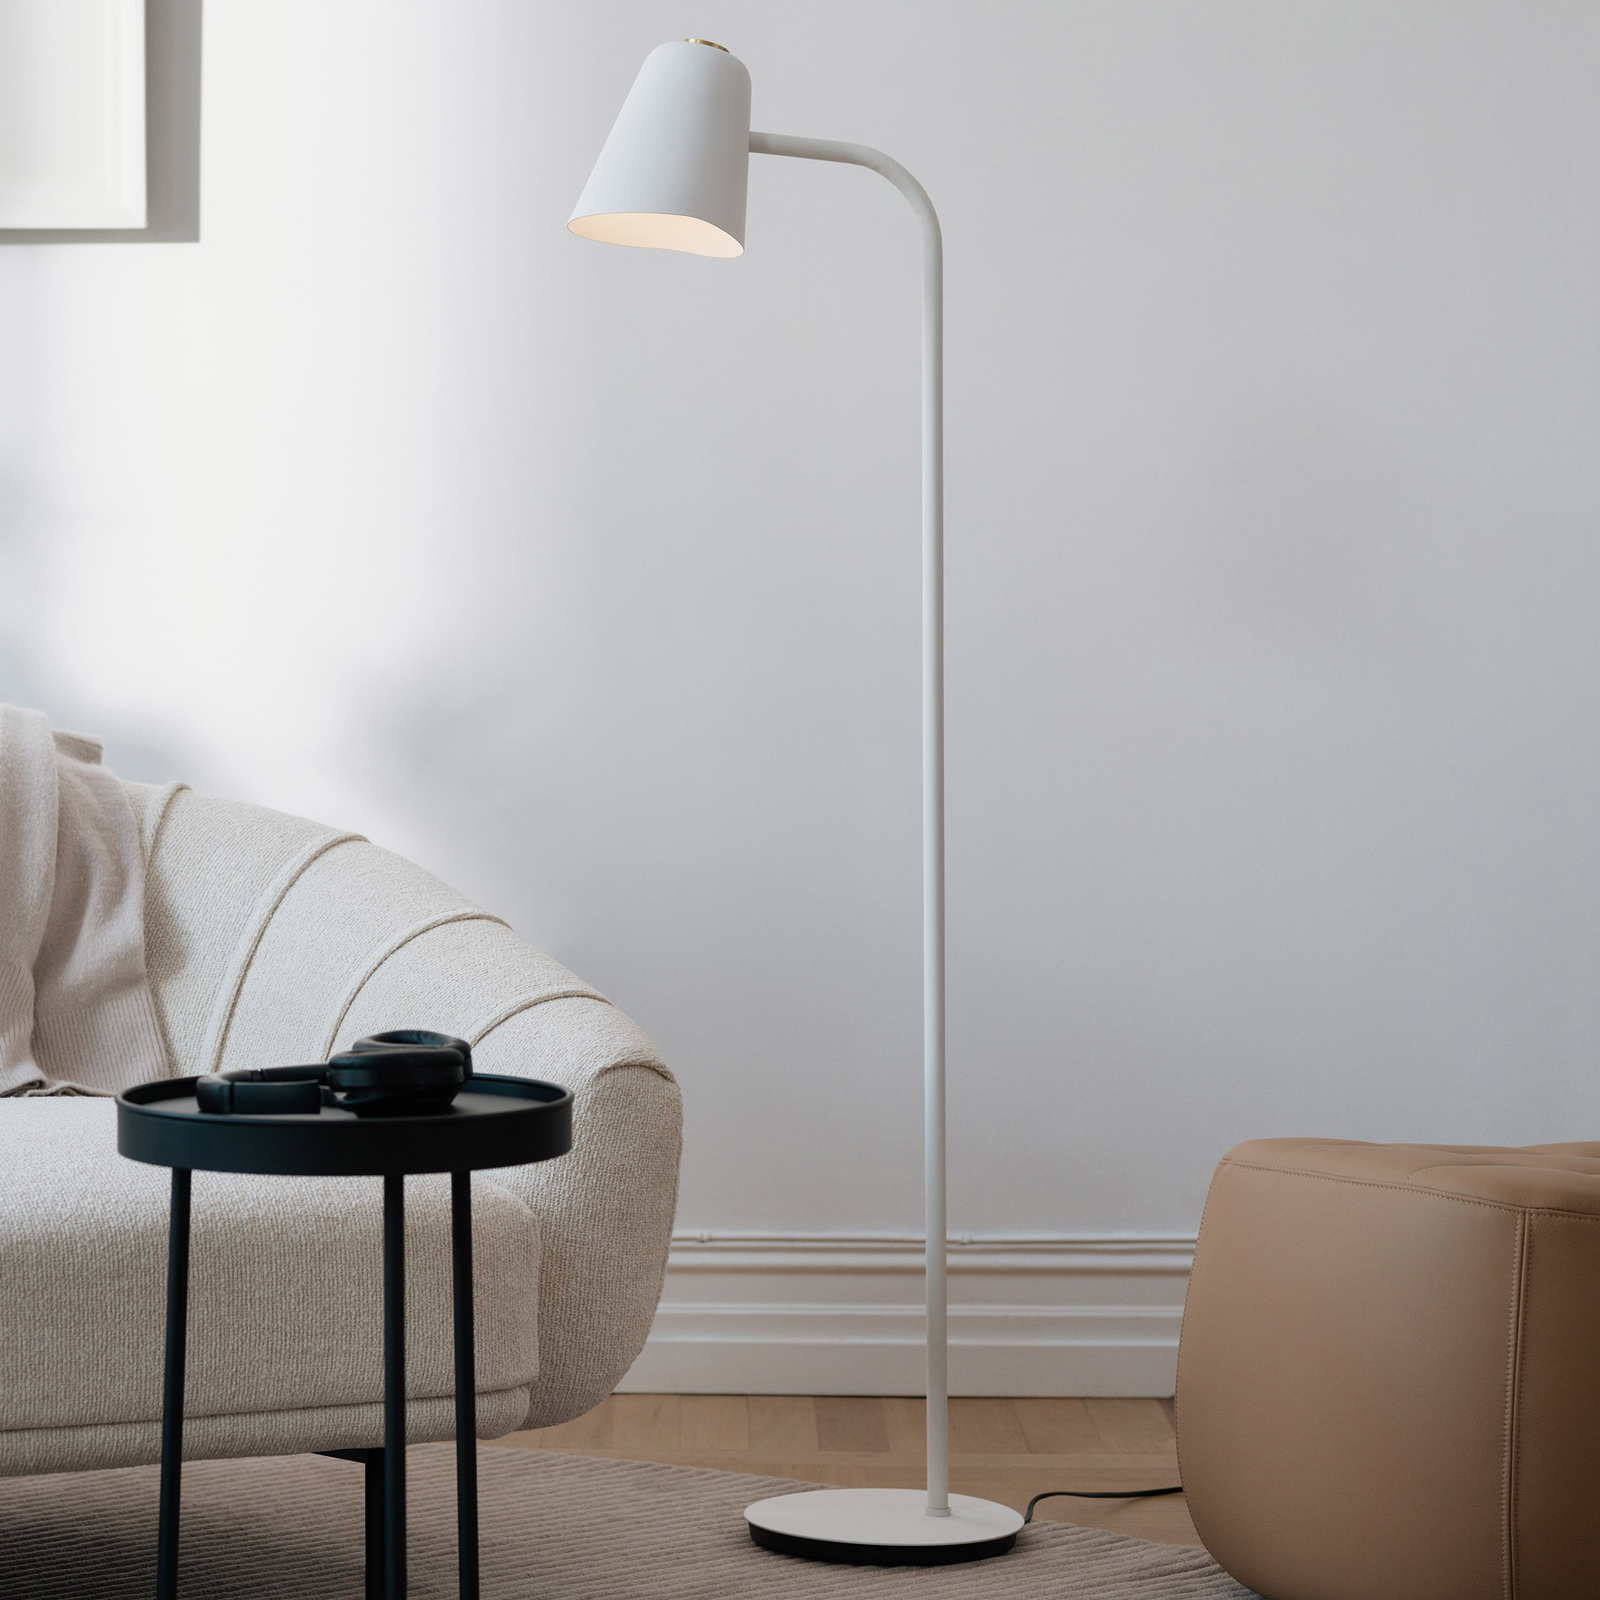 Northern Me dim LED floor lamp dimmable white